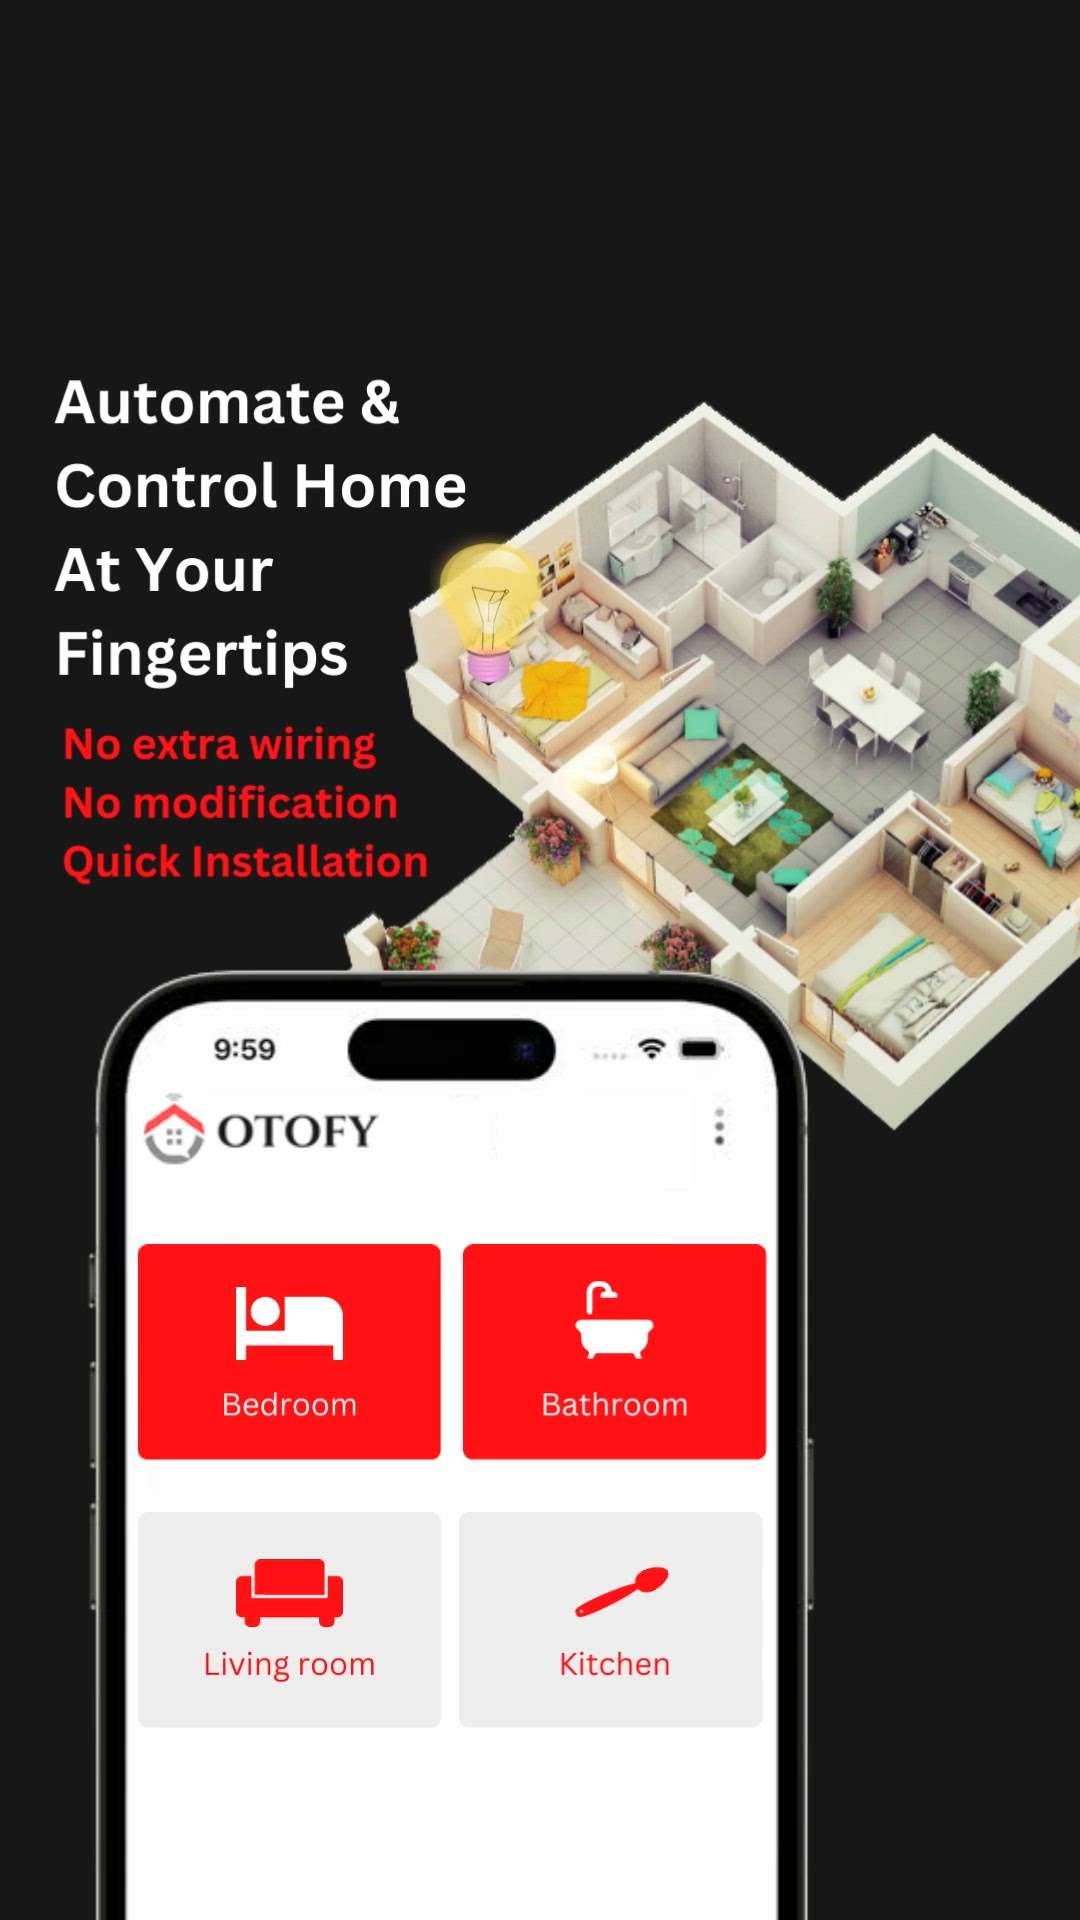 Automate your 🏠home & control all home devices from your 📱Mobile.
:
🛠️Quick Installation - No extra wiring - No modification
:
OTOFY PROUDLY MADE 796+ SMART HOMES AND NOW IT'S YOUR TURN.
:
📞Tel:+9196252 28187 & follow us : @otofy.life
:
Follow Us:-
Instgram - https://lnkd.in/g5g2F2J5
Facbook - https://lnkd.in/gV2Dy_Ut
Linkdin - https://lnkd.in/gcQimCFq

#SMARTHOMEAUTOMATION #alexahomeautomation #home #WiFi #wifiHomeAutomation #automation #control #homeautomation #okgoogle #siri #homeappliances #homecontrol #homecontrolsystems #alexa #controldevices #google #homeelectronics